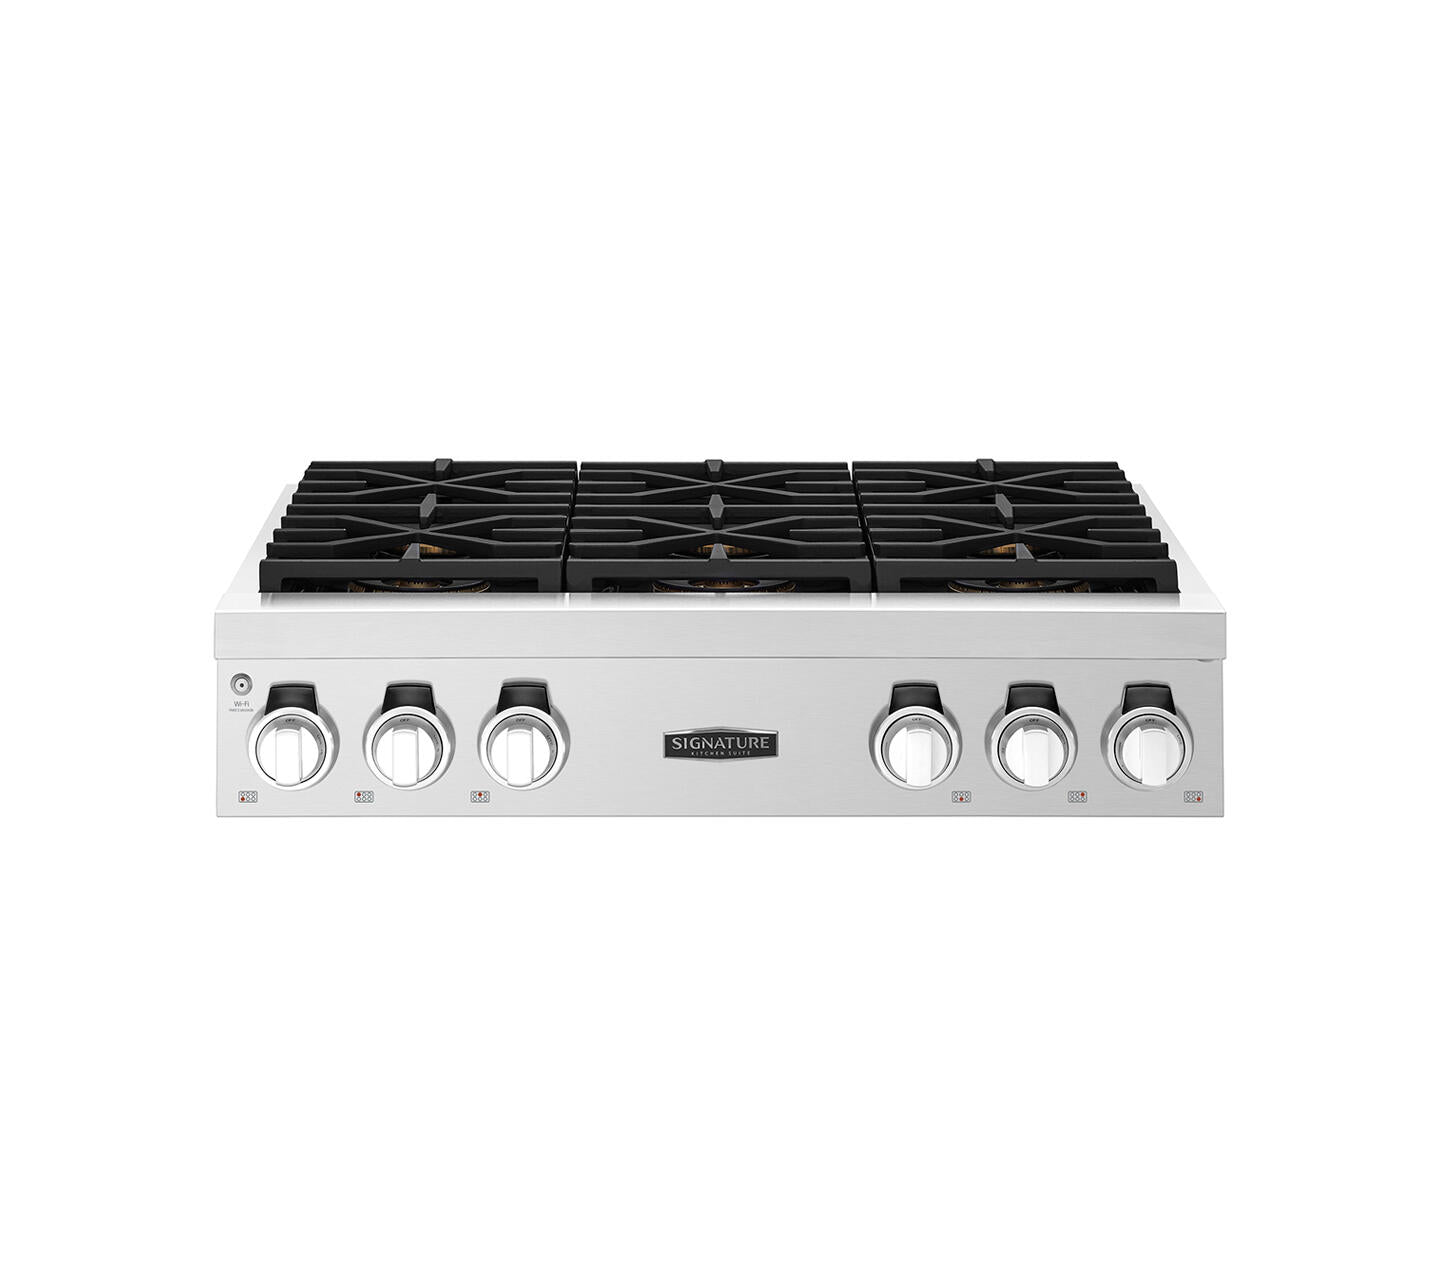 Signature Kitchen Suite SKSRT360S 36-Inch Pro Rangetop With 6 Burners